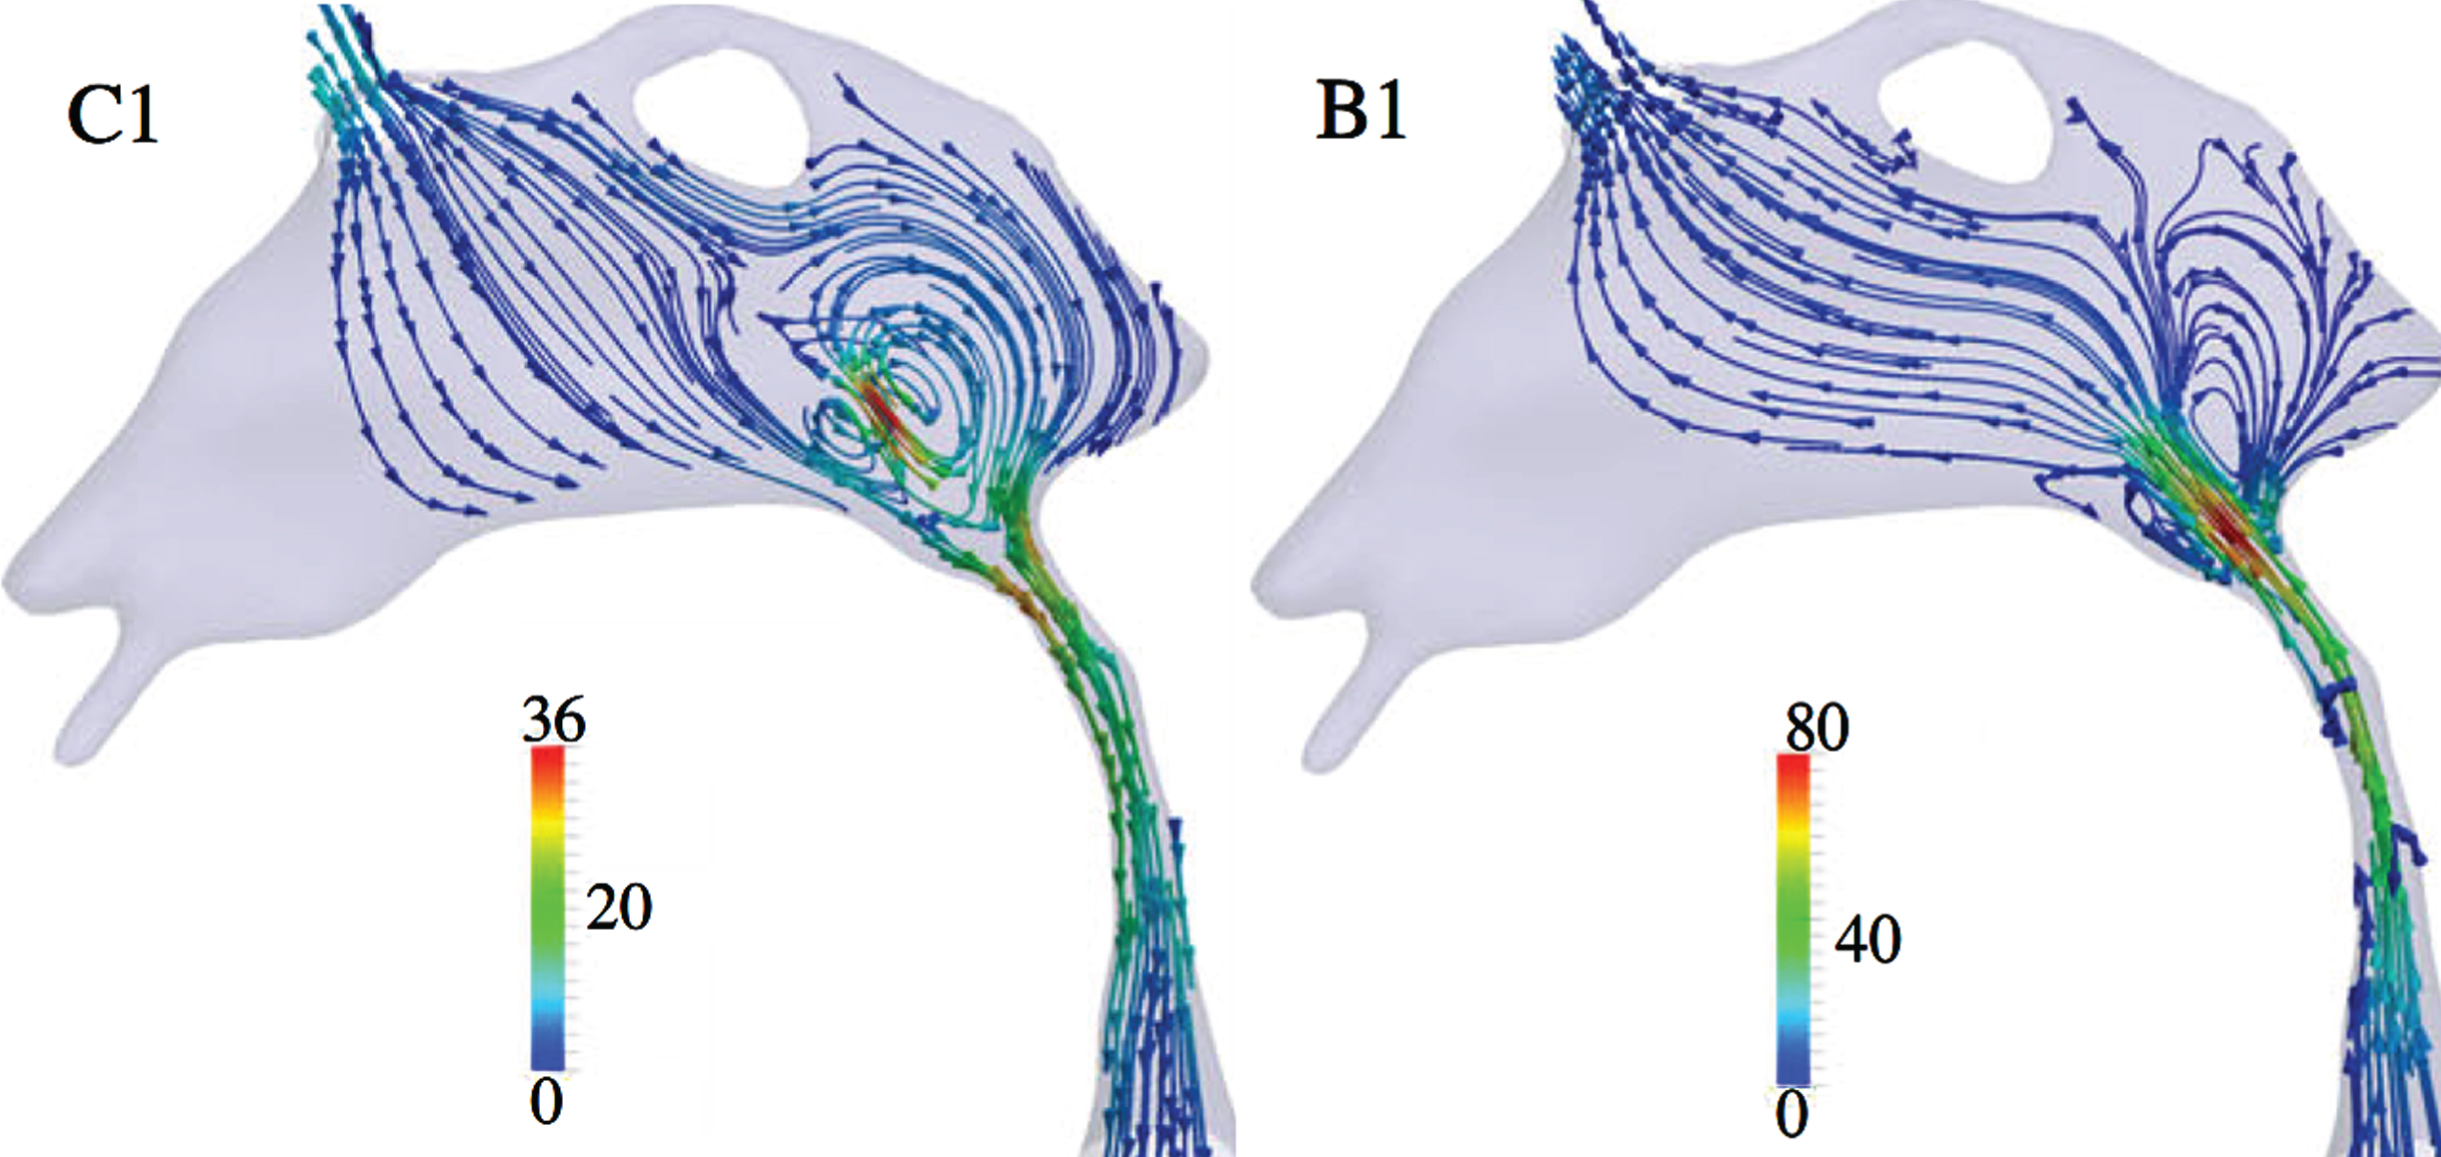 Cyclic reciprocal CSF flow directions and rates in the third ventricle (top), cerebral aqueduct (CA) (middle tube), and top of third ventricle (bottom, widening) at two time points in the cardiac cycle, showing reversals in CSF flow direction (C1-flow toward fourth ventricle; B1-flow toward third ventricle). Flow rates are calculated from MRI data and hydrodynamic computations [39]. CSF flow rates are in mm/s–1 according to color coded lines and keys. Modified from [39] under Creative Commons CC-BY license.